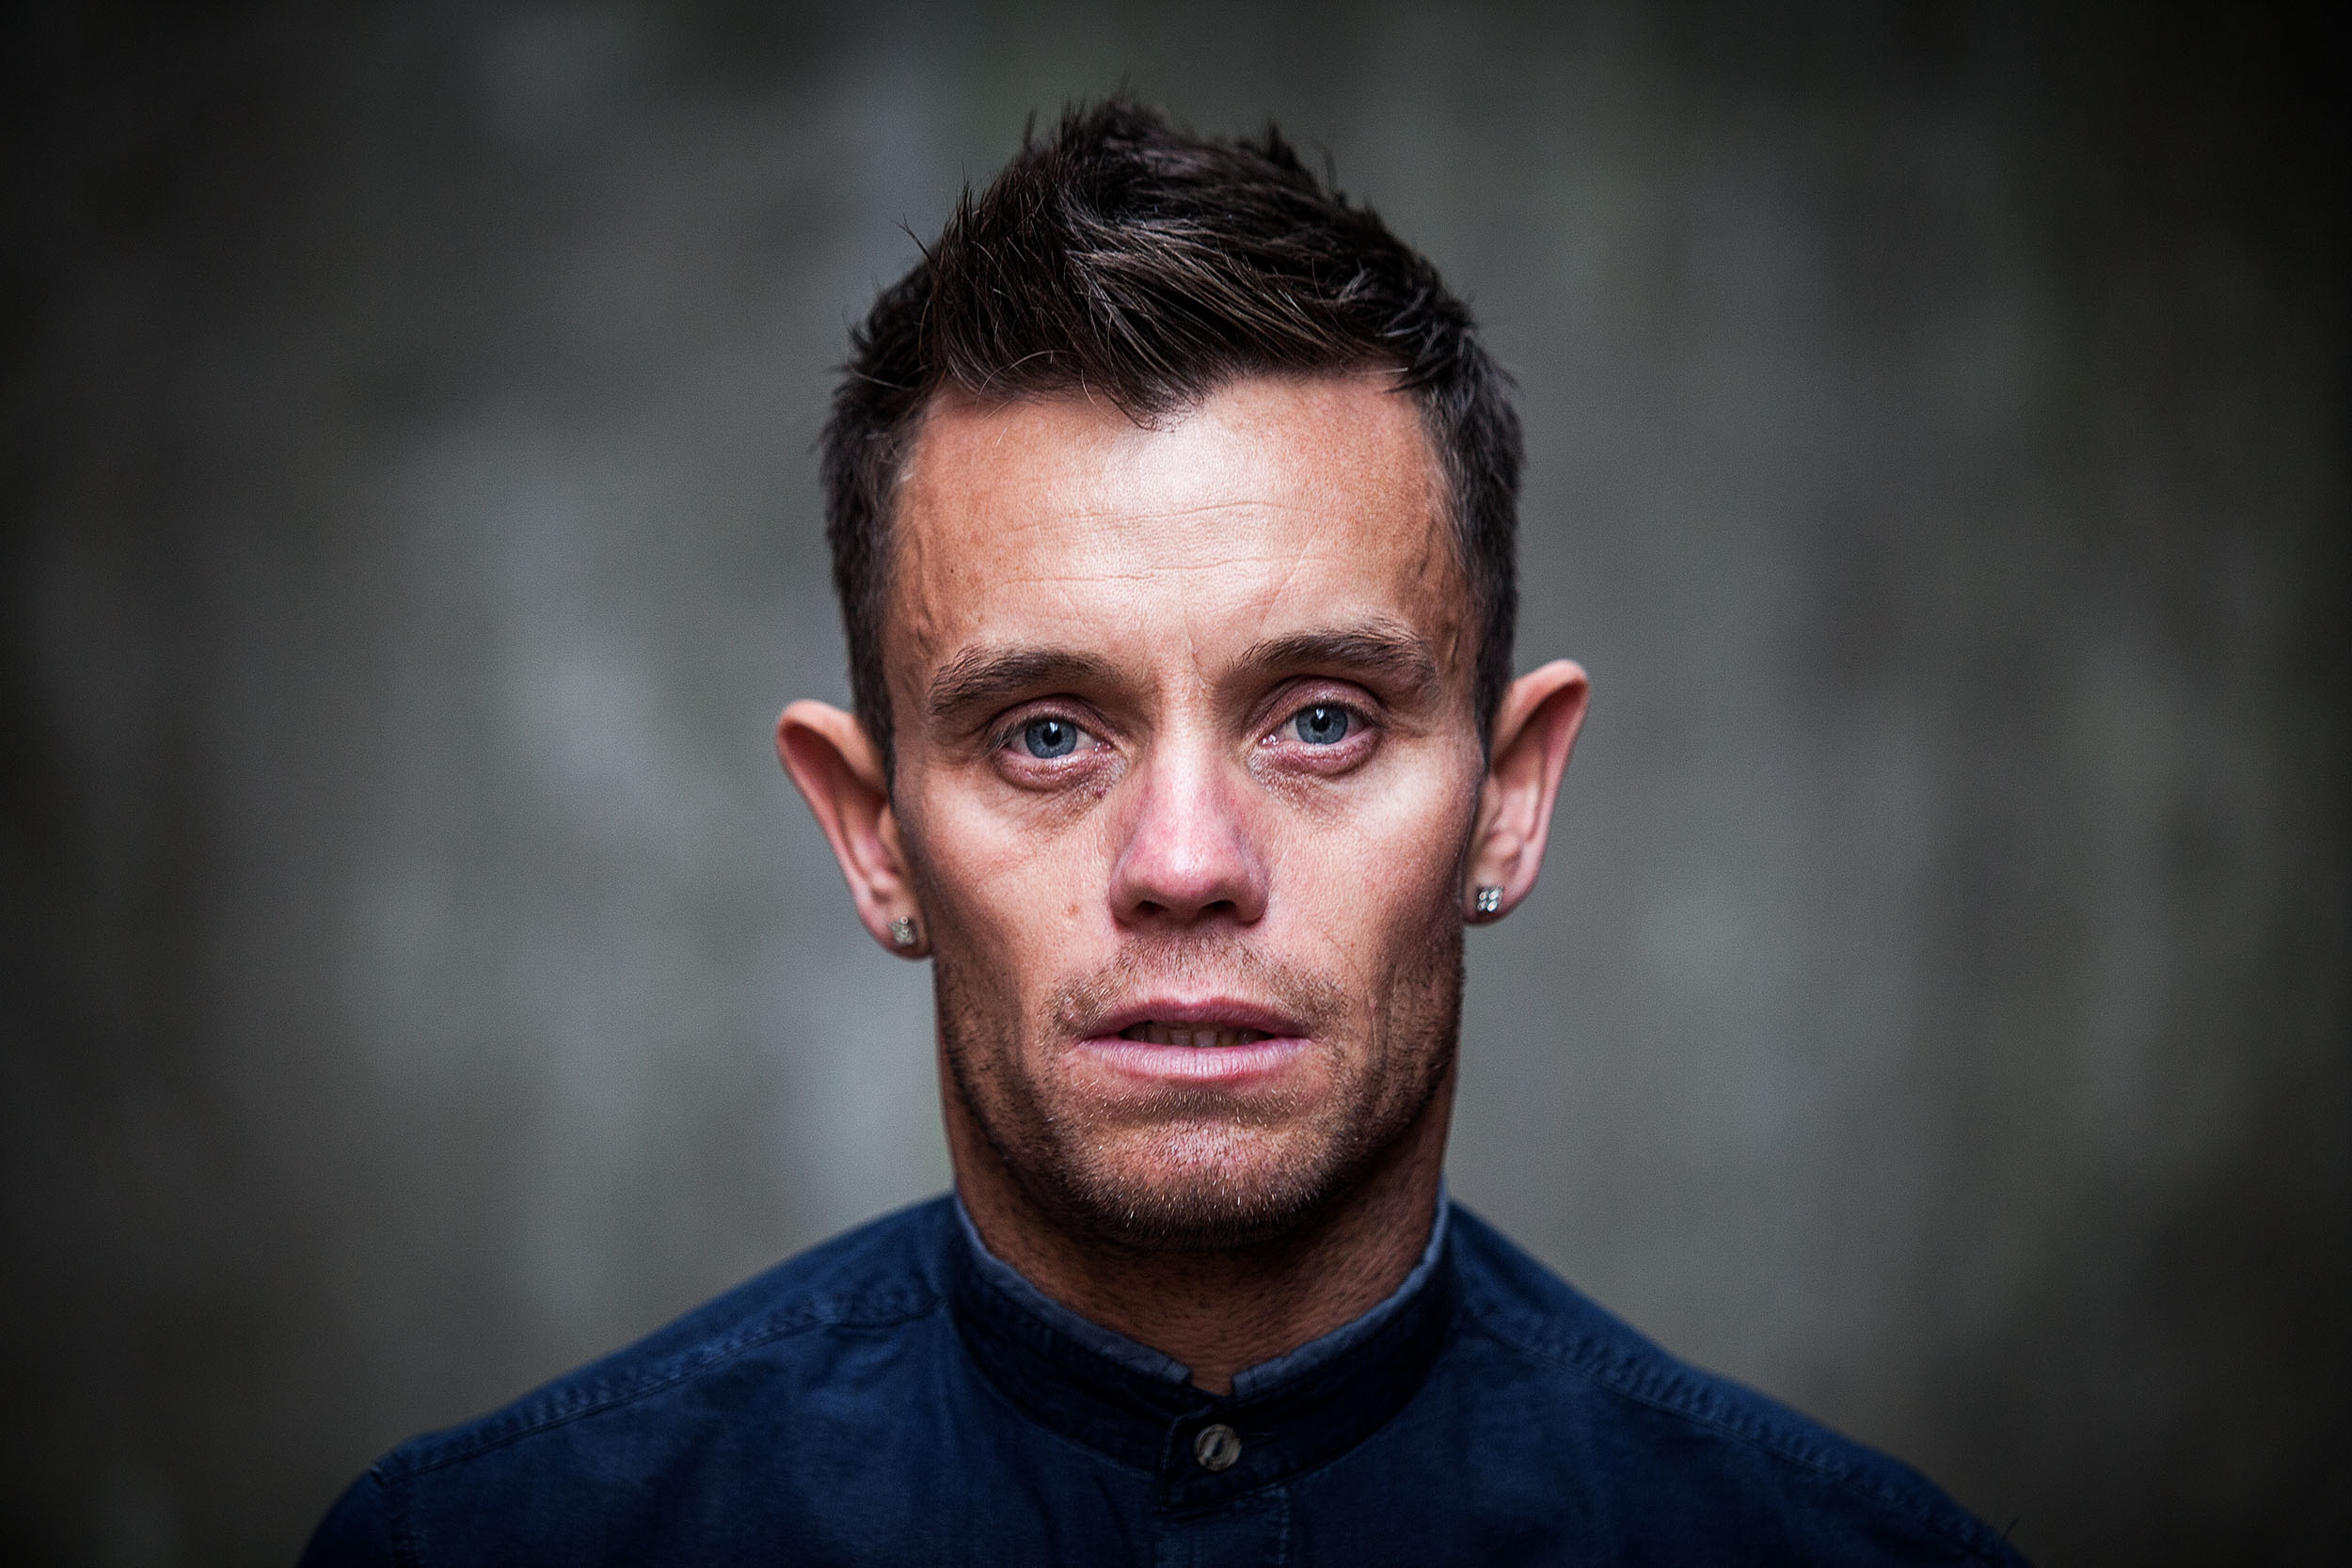  "The money, the football... it ended up getting too much, where I thought to myself: 'I can't carry on here.' It was horrible" Lee Hendrie, former Premiership footballer. He attempted suicide twice when bankrupt 